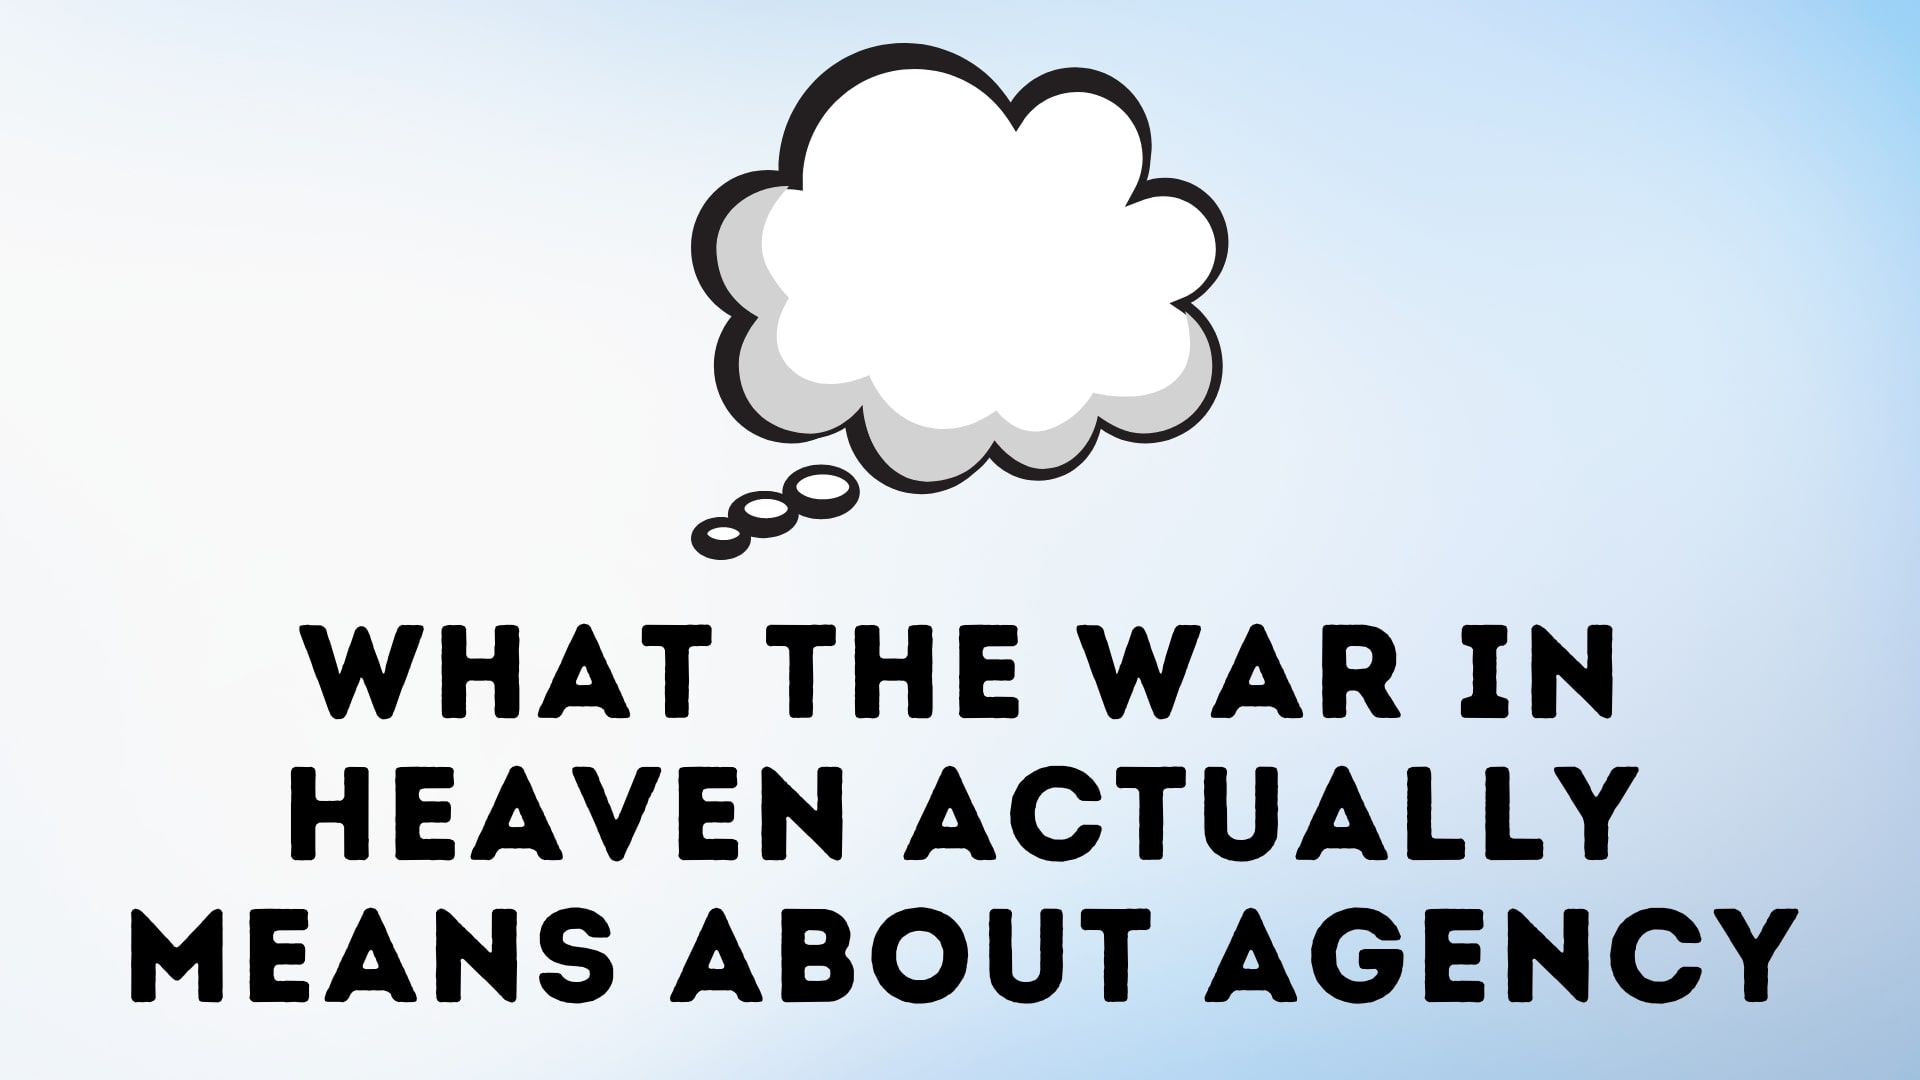 What the War in Heaven Actually Means About Agency